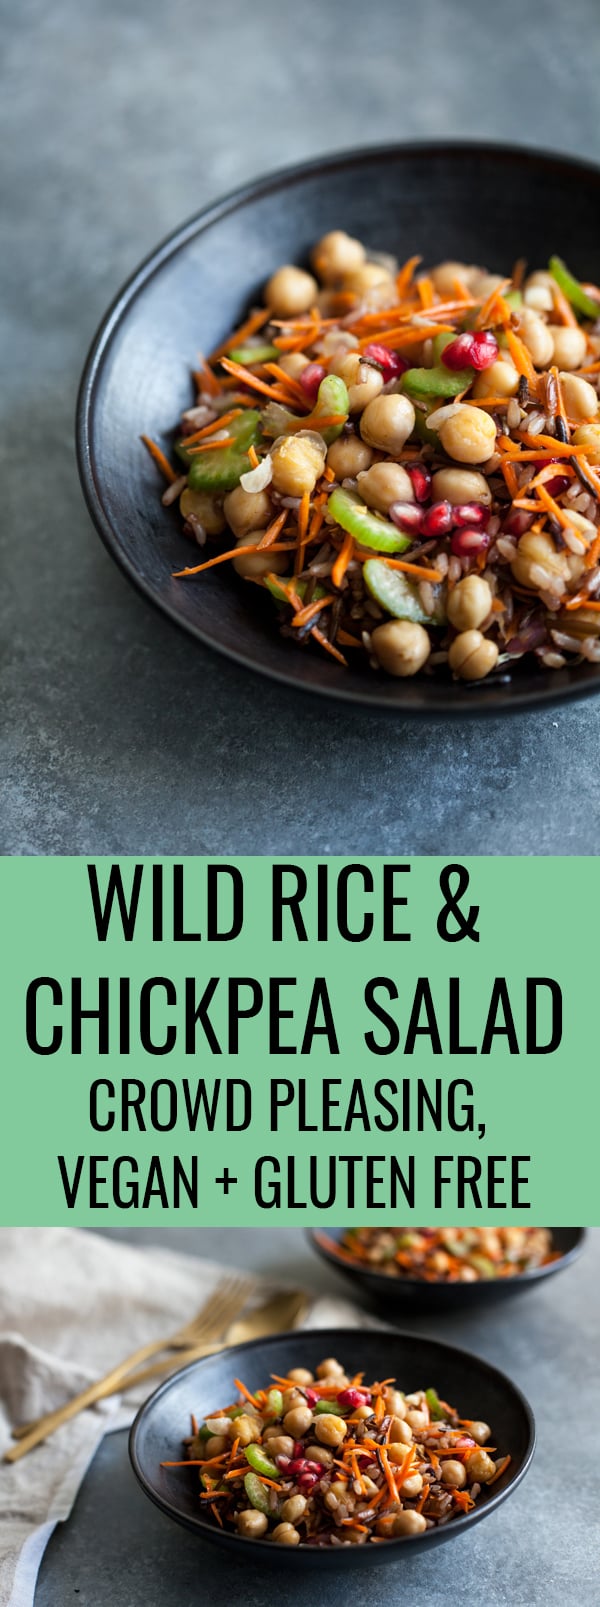 A nutritious, festive, and simple wild rice & chickpea salad that's sure to please a crowd!